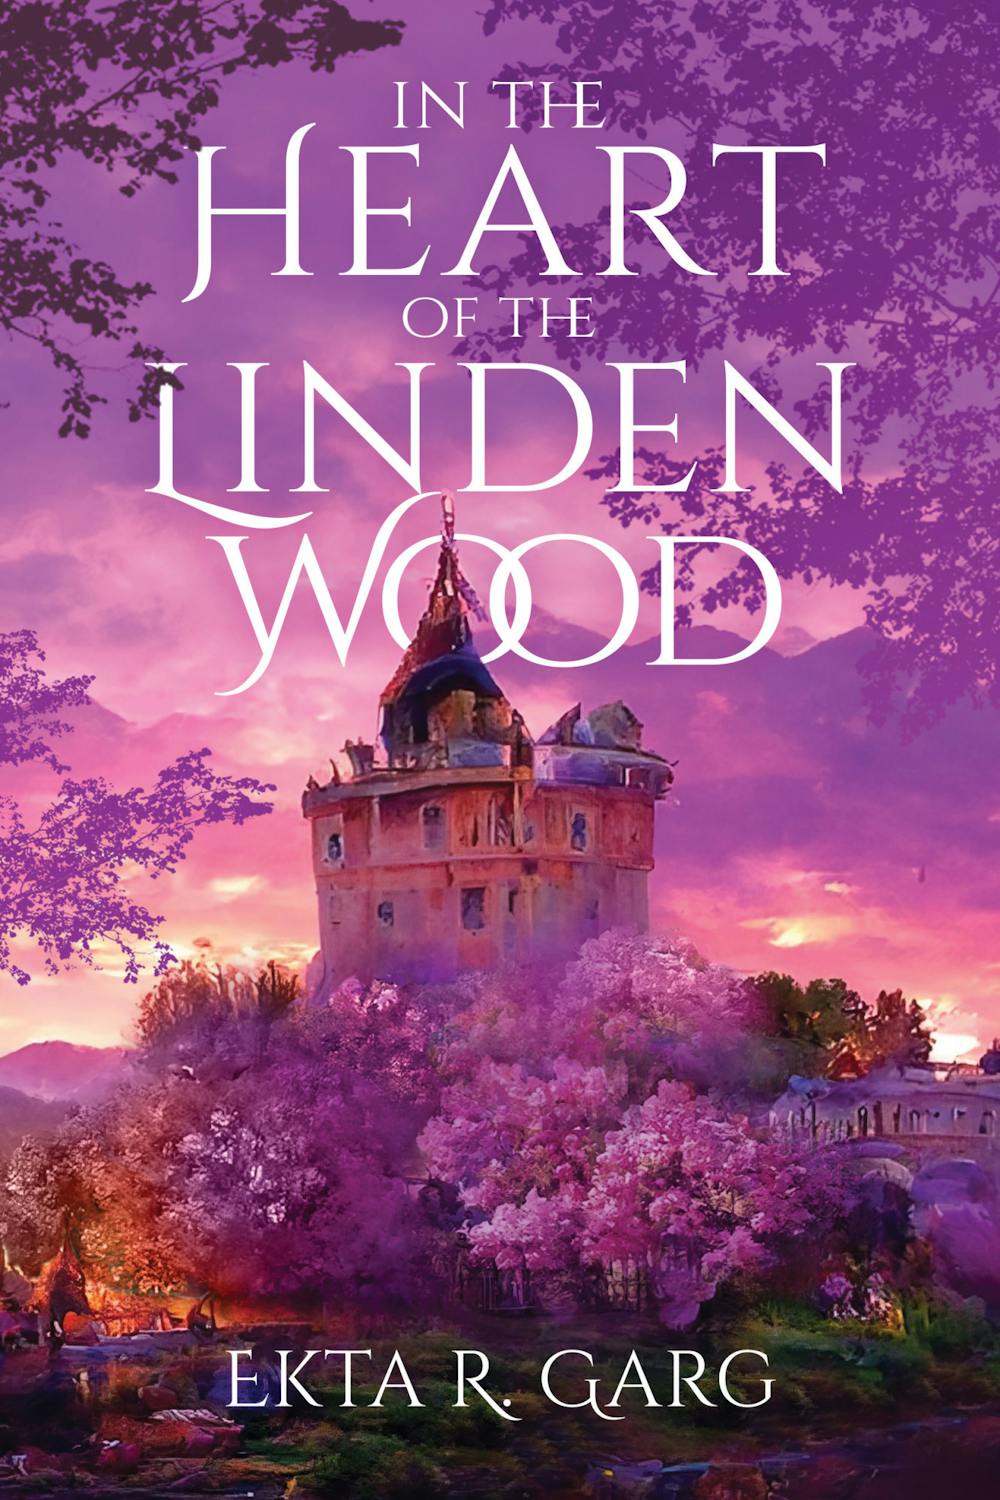 <p>The cover of the Ekta Garg's newest novel, "In the Heart of the Linden Wood." The book is a fantasy story that follows a king trying to provide for his kingdom while trying to heal from deep-rooted trauma and a broken heart.&nbsp;</p>